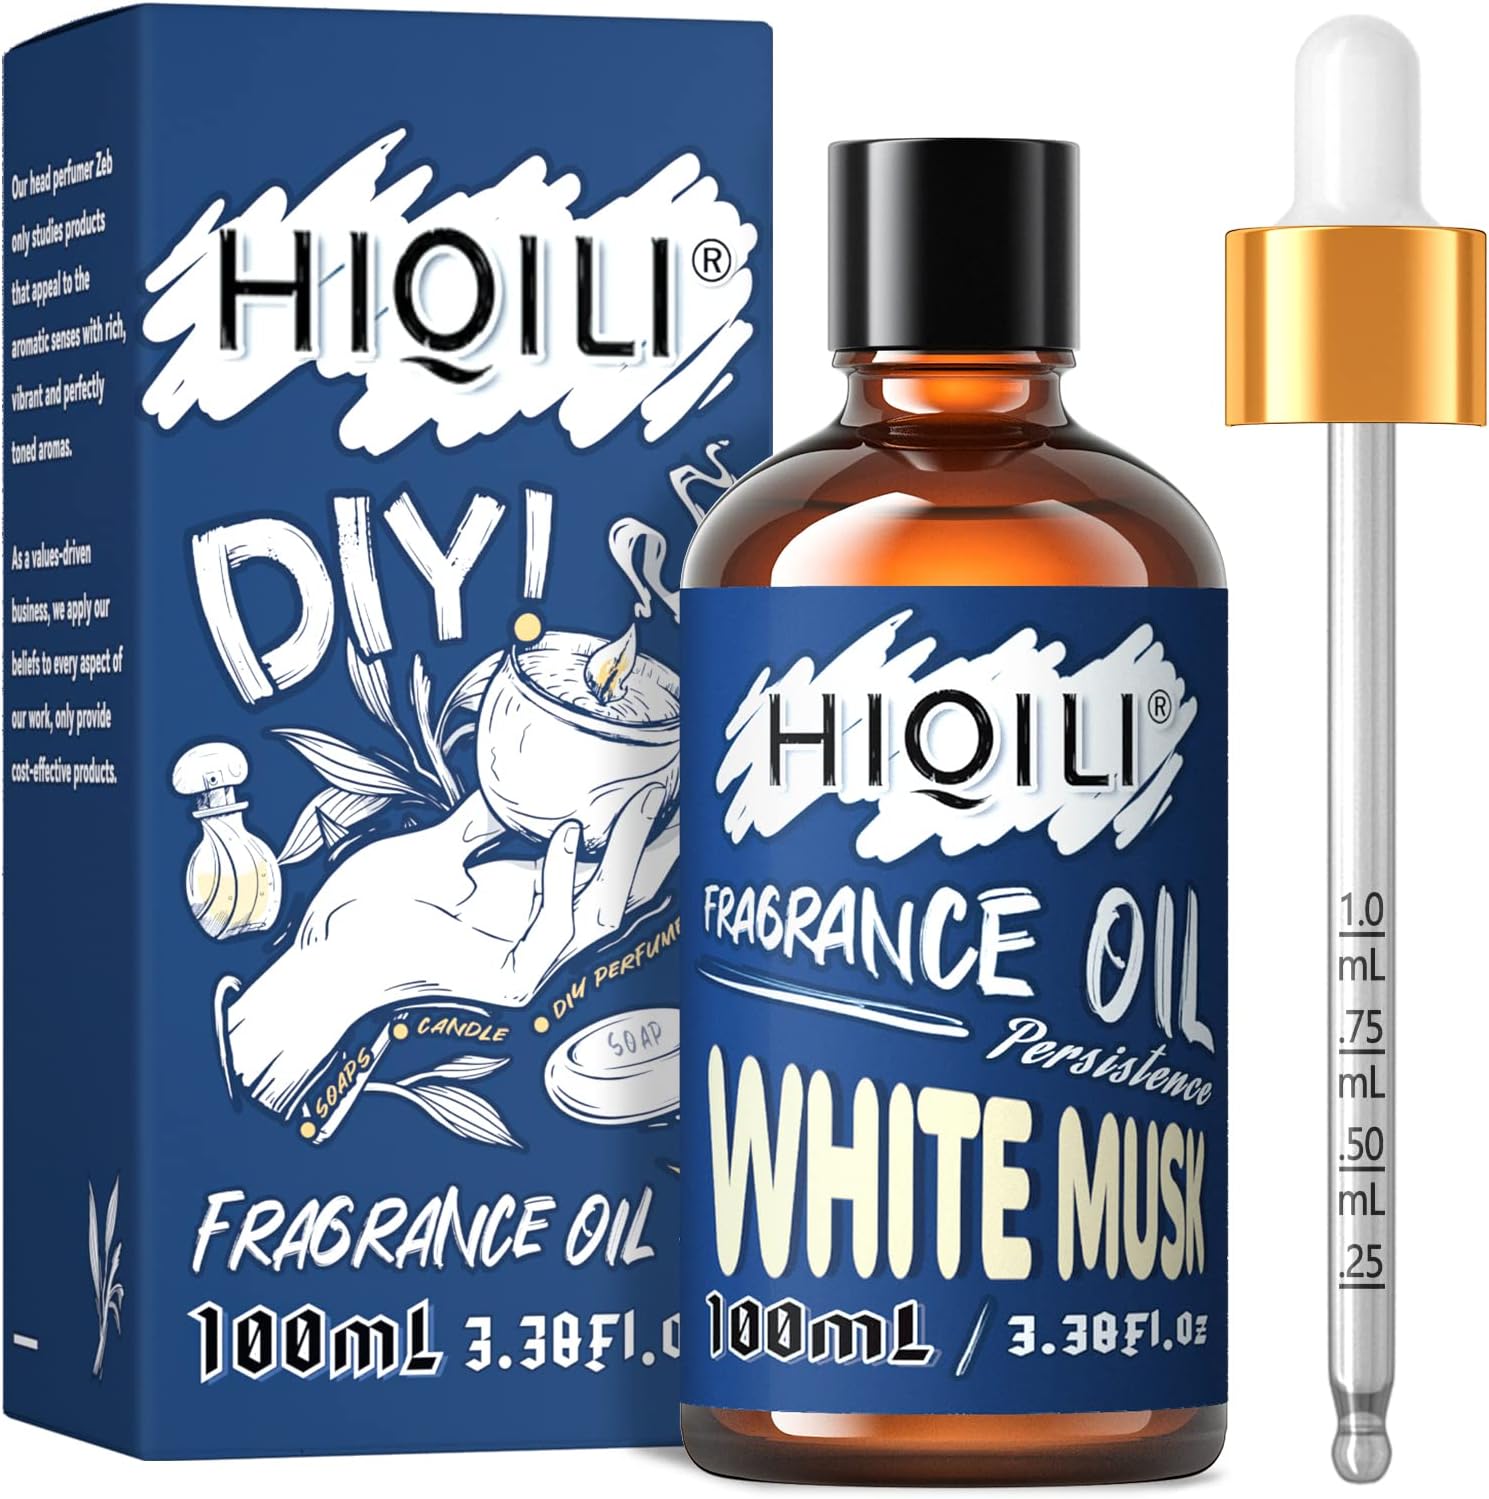 HIQILI Fragrance Oil White Musk 100ml for Candle Soap Making, Essential Oils for Diffuser Aromatherapy, Scented Oils for Home Car 3.38 Fl.Oz